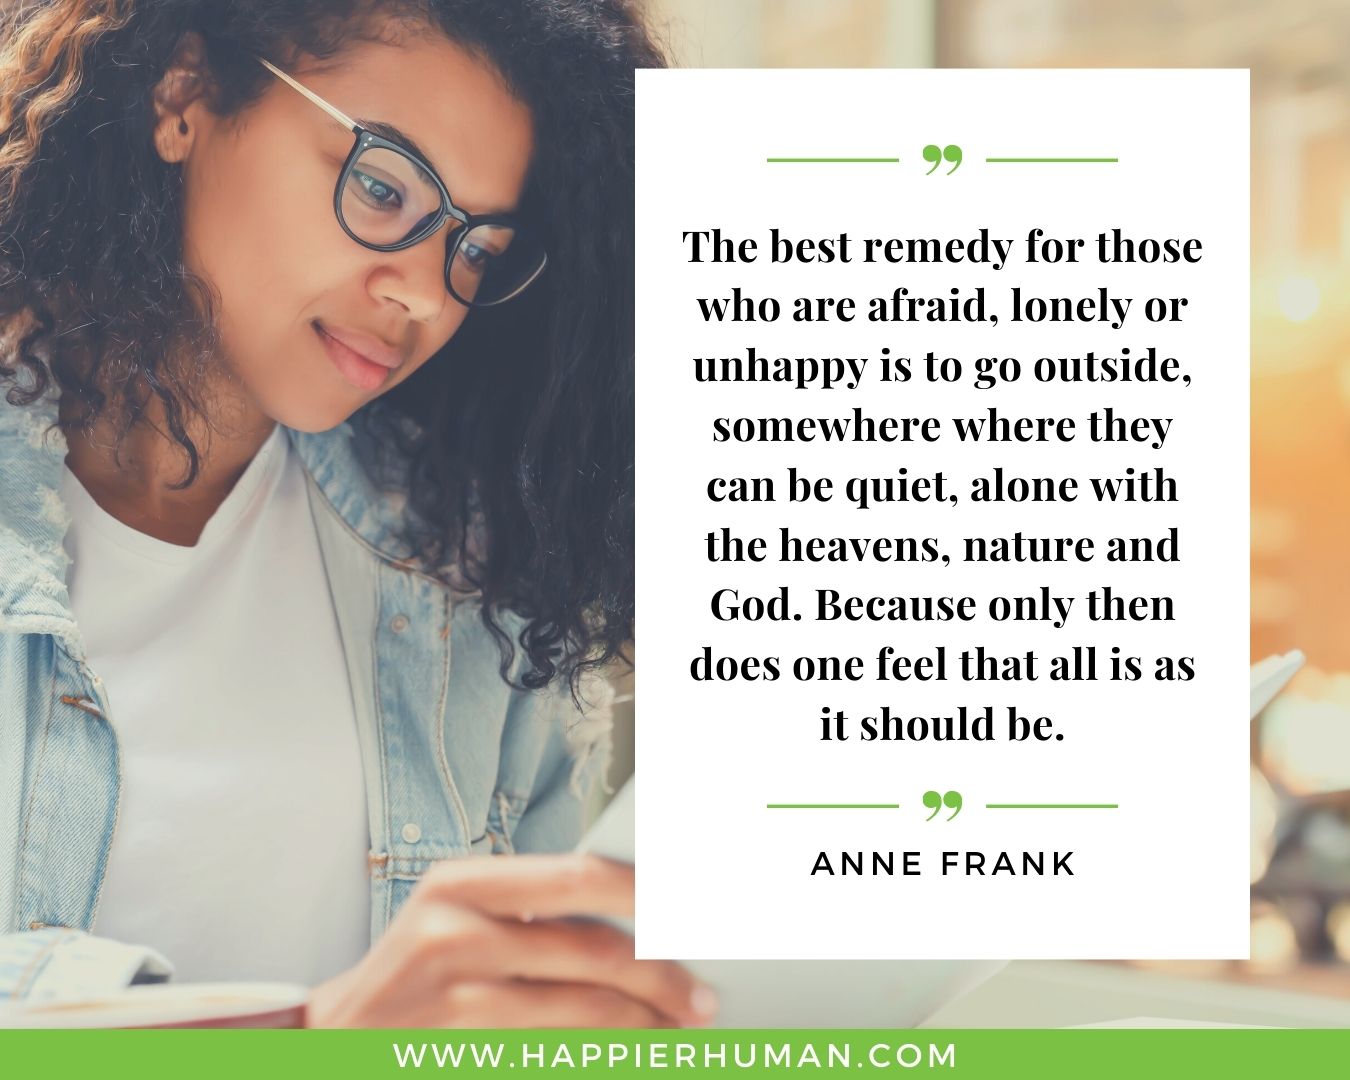 Loneliness Quotes - “The best remedy for those who are afraid, lonely or unhappy is to go outside, somewhere where they can be quiet, alone with the heavens, nature and God. Because only then does one feel that all is as it should be.” – Anne Frank